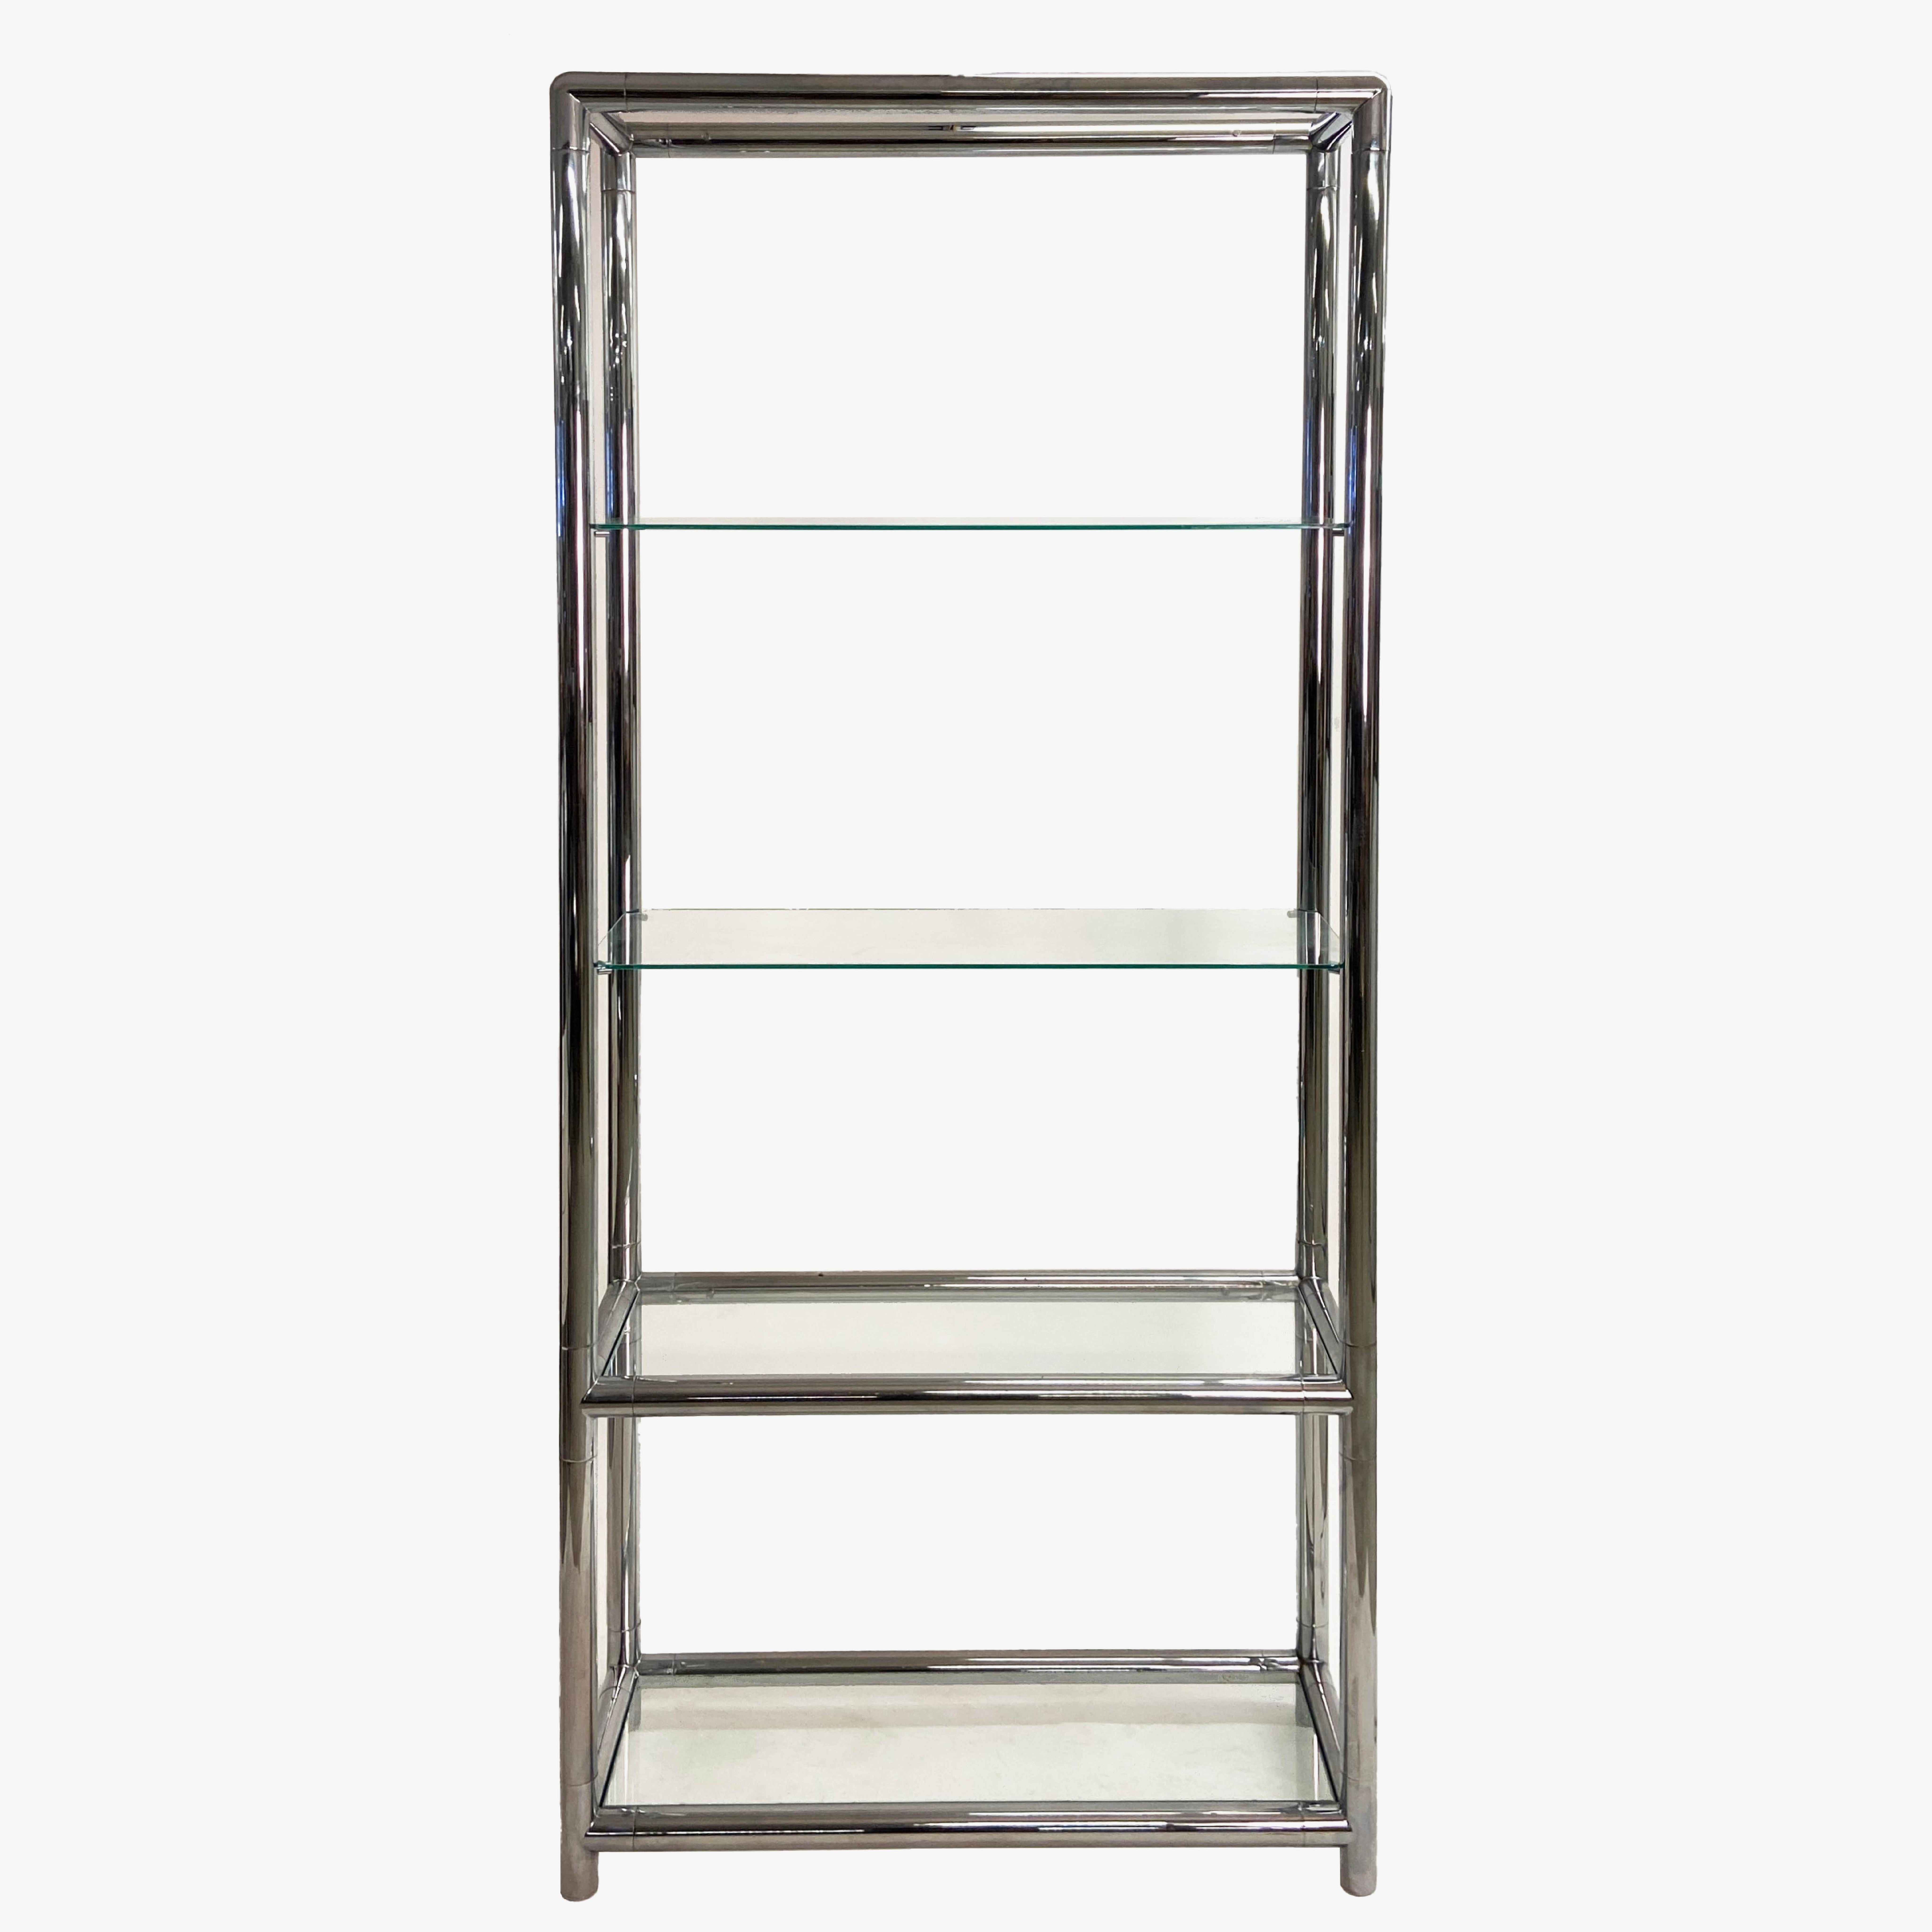 Simple and elegant 1960’s display shelf in a chunky tubular chrome frame. Designed by John Mascheroni, this stunning etagere has five glass shelves, including top and bottom. There are minor signs of wear but in overall good condition, consistent